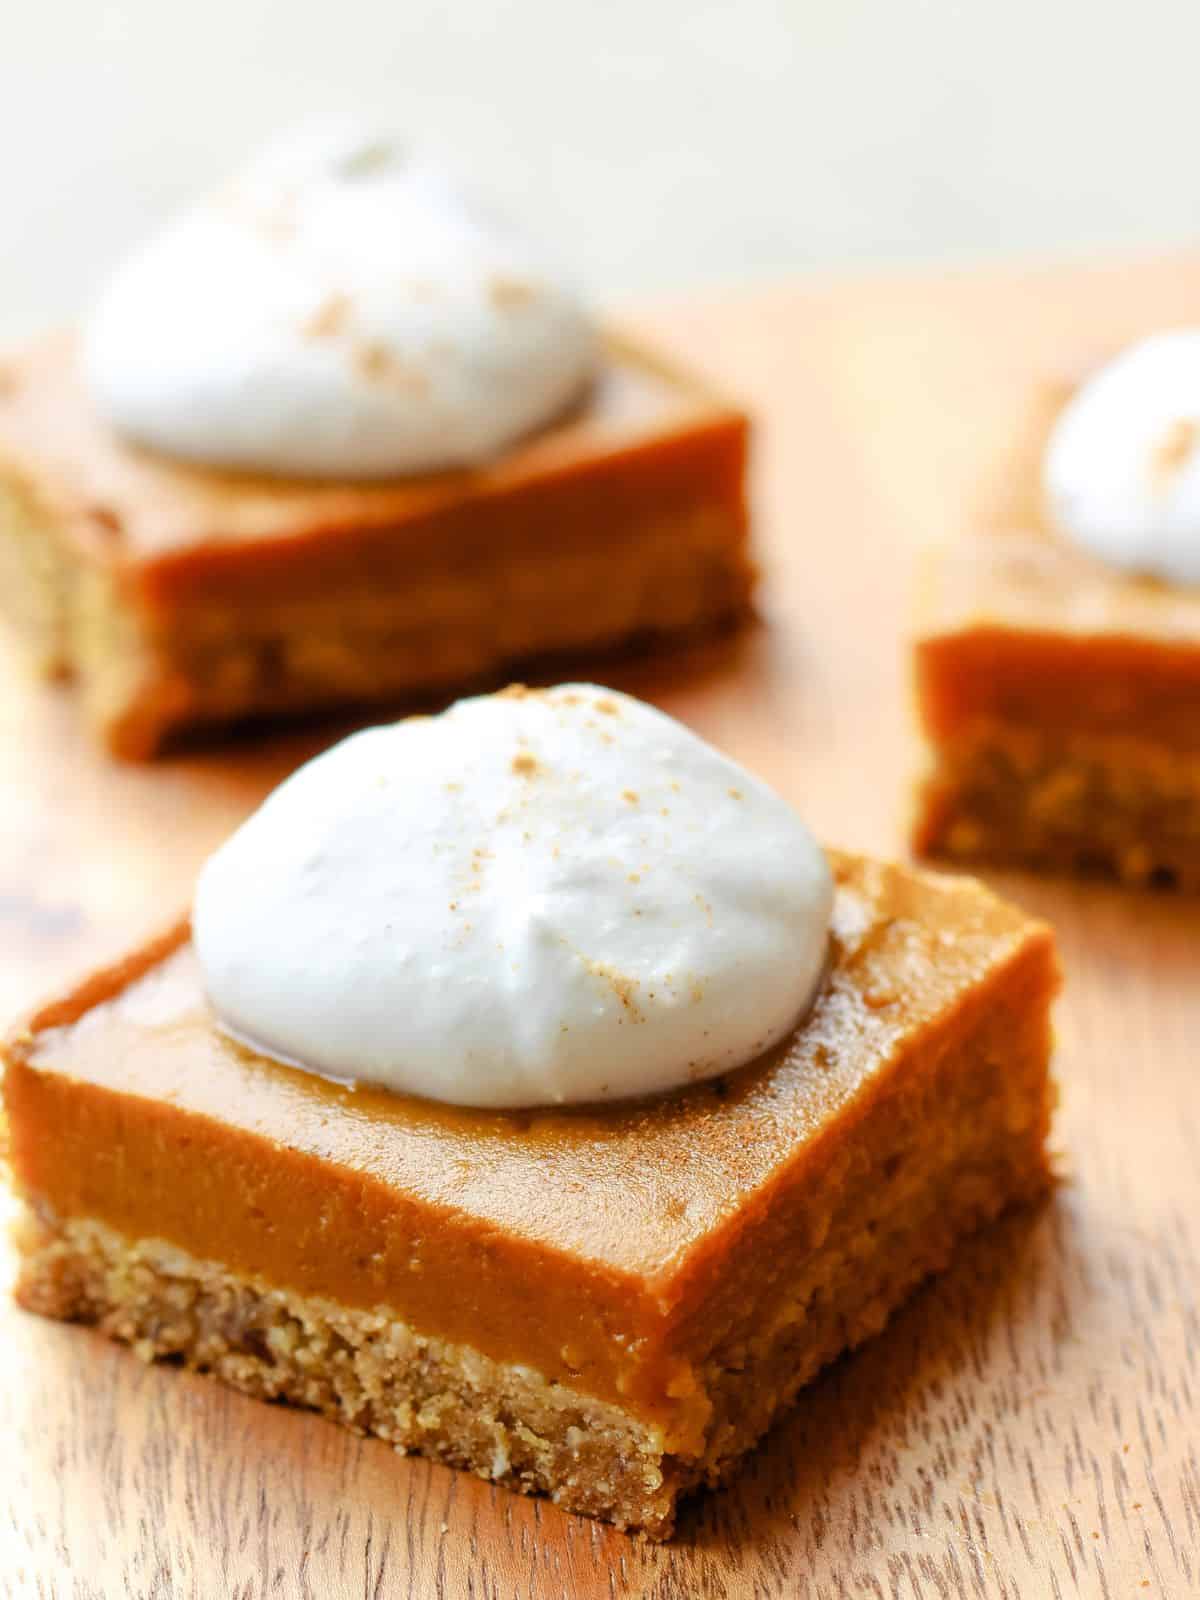 Pumpkin pie bar topped with whipped cream.
